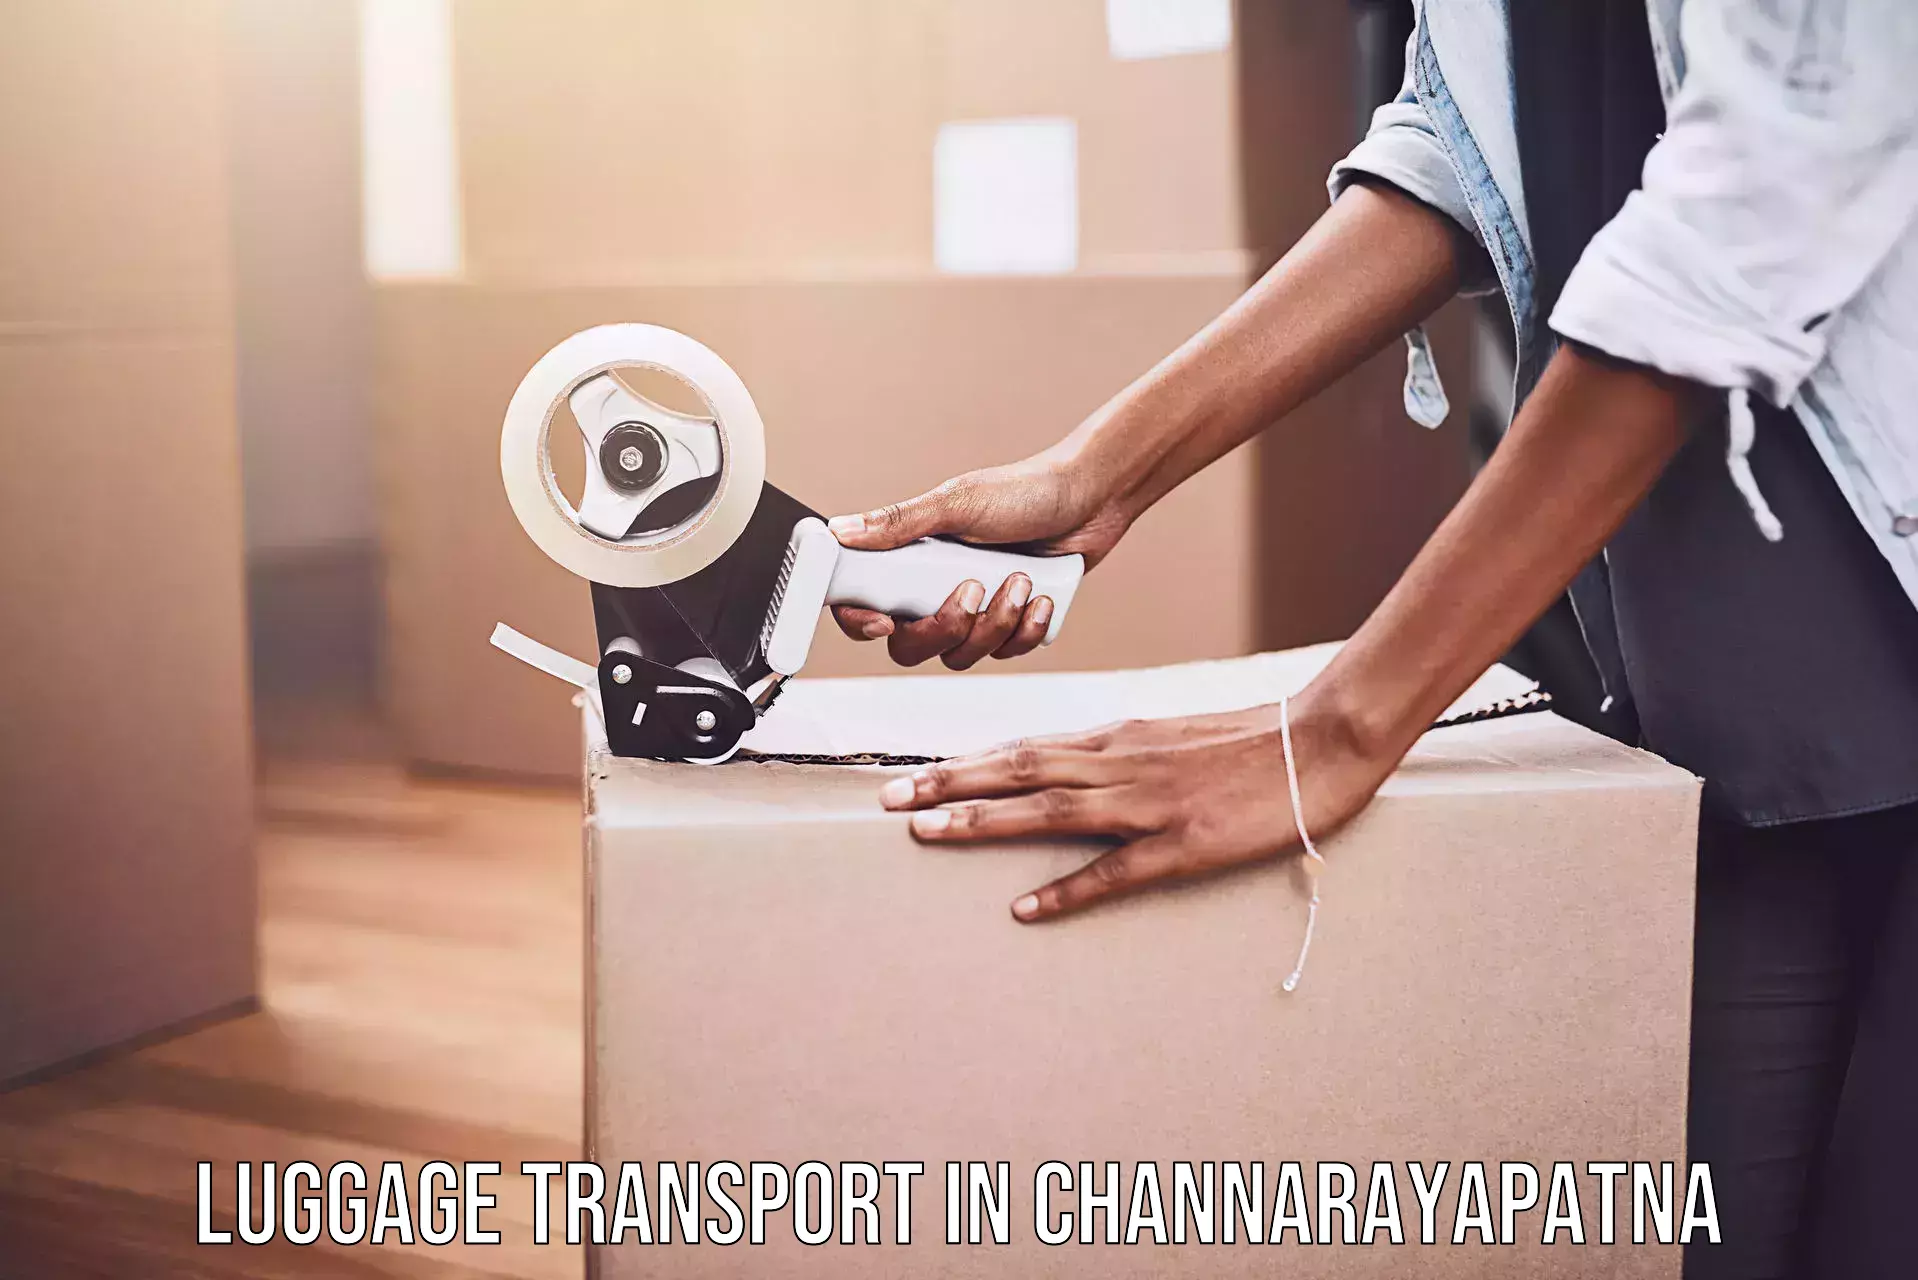 Luggage delivery solutions in Channarayapatna